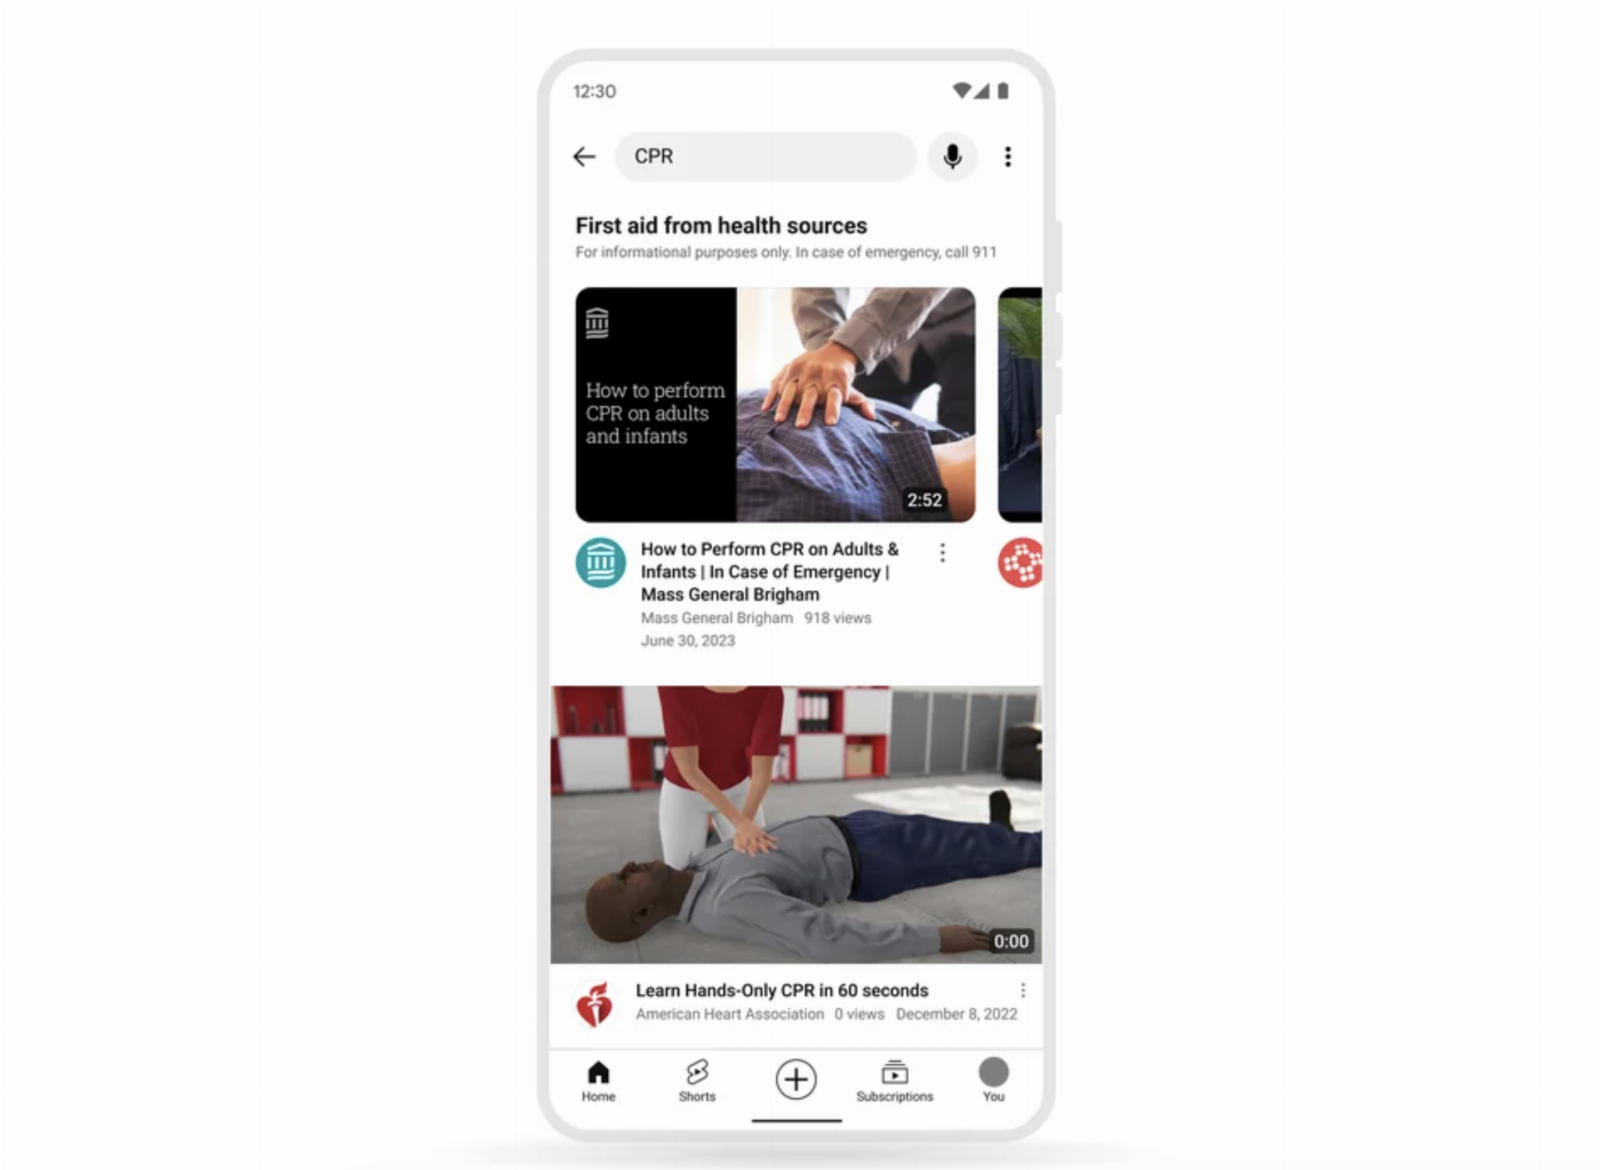 YouTube is making it easier to find accurate information about first aid and emergency care